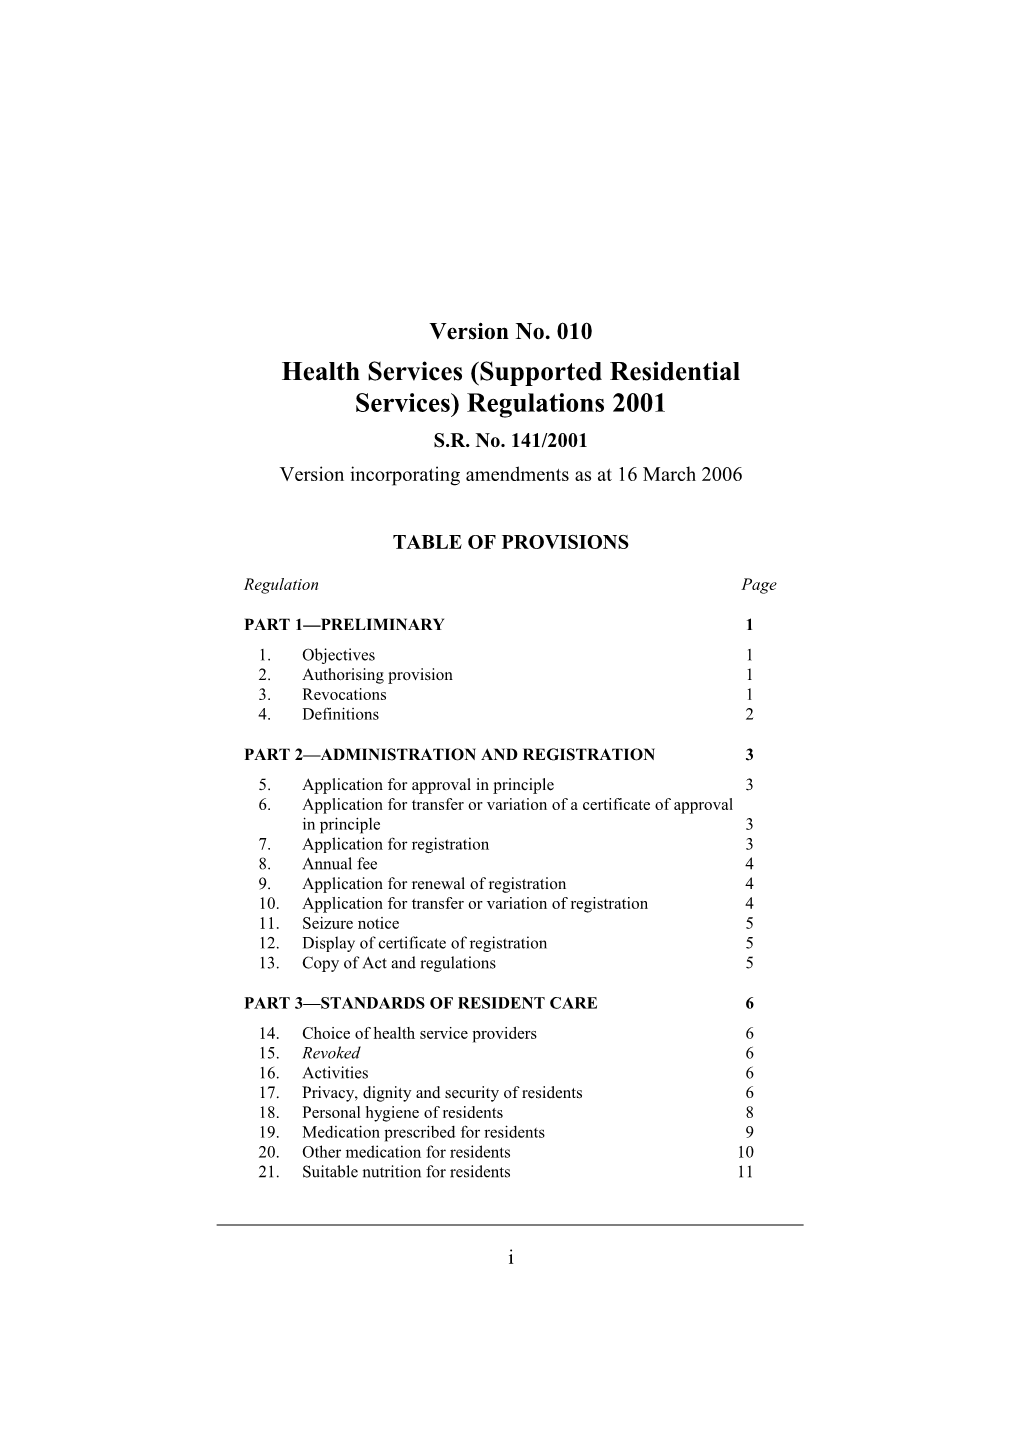 Health Services (Supported Residential Services) Regulations 2001